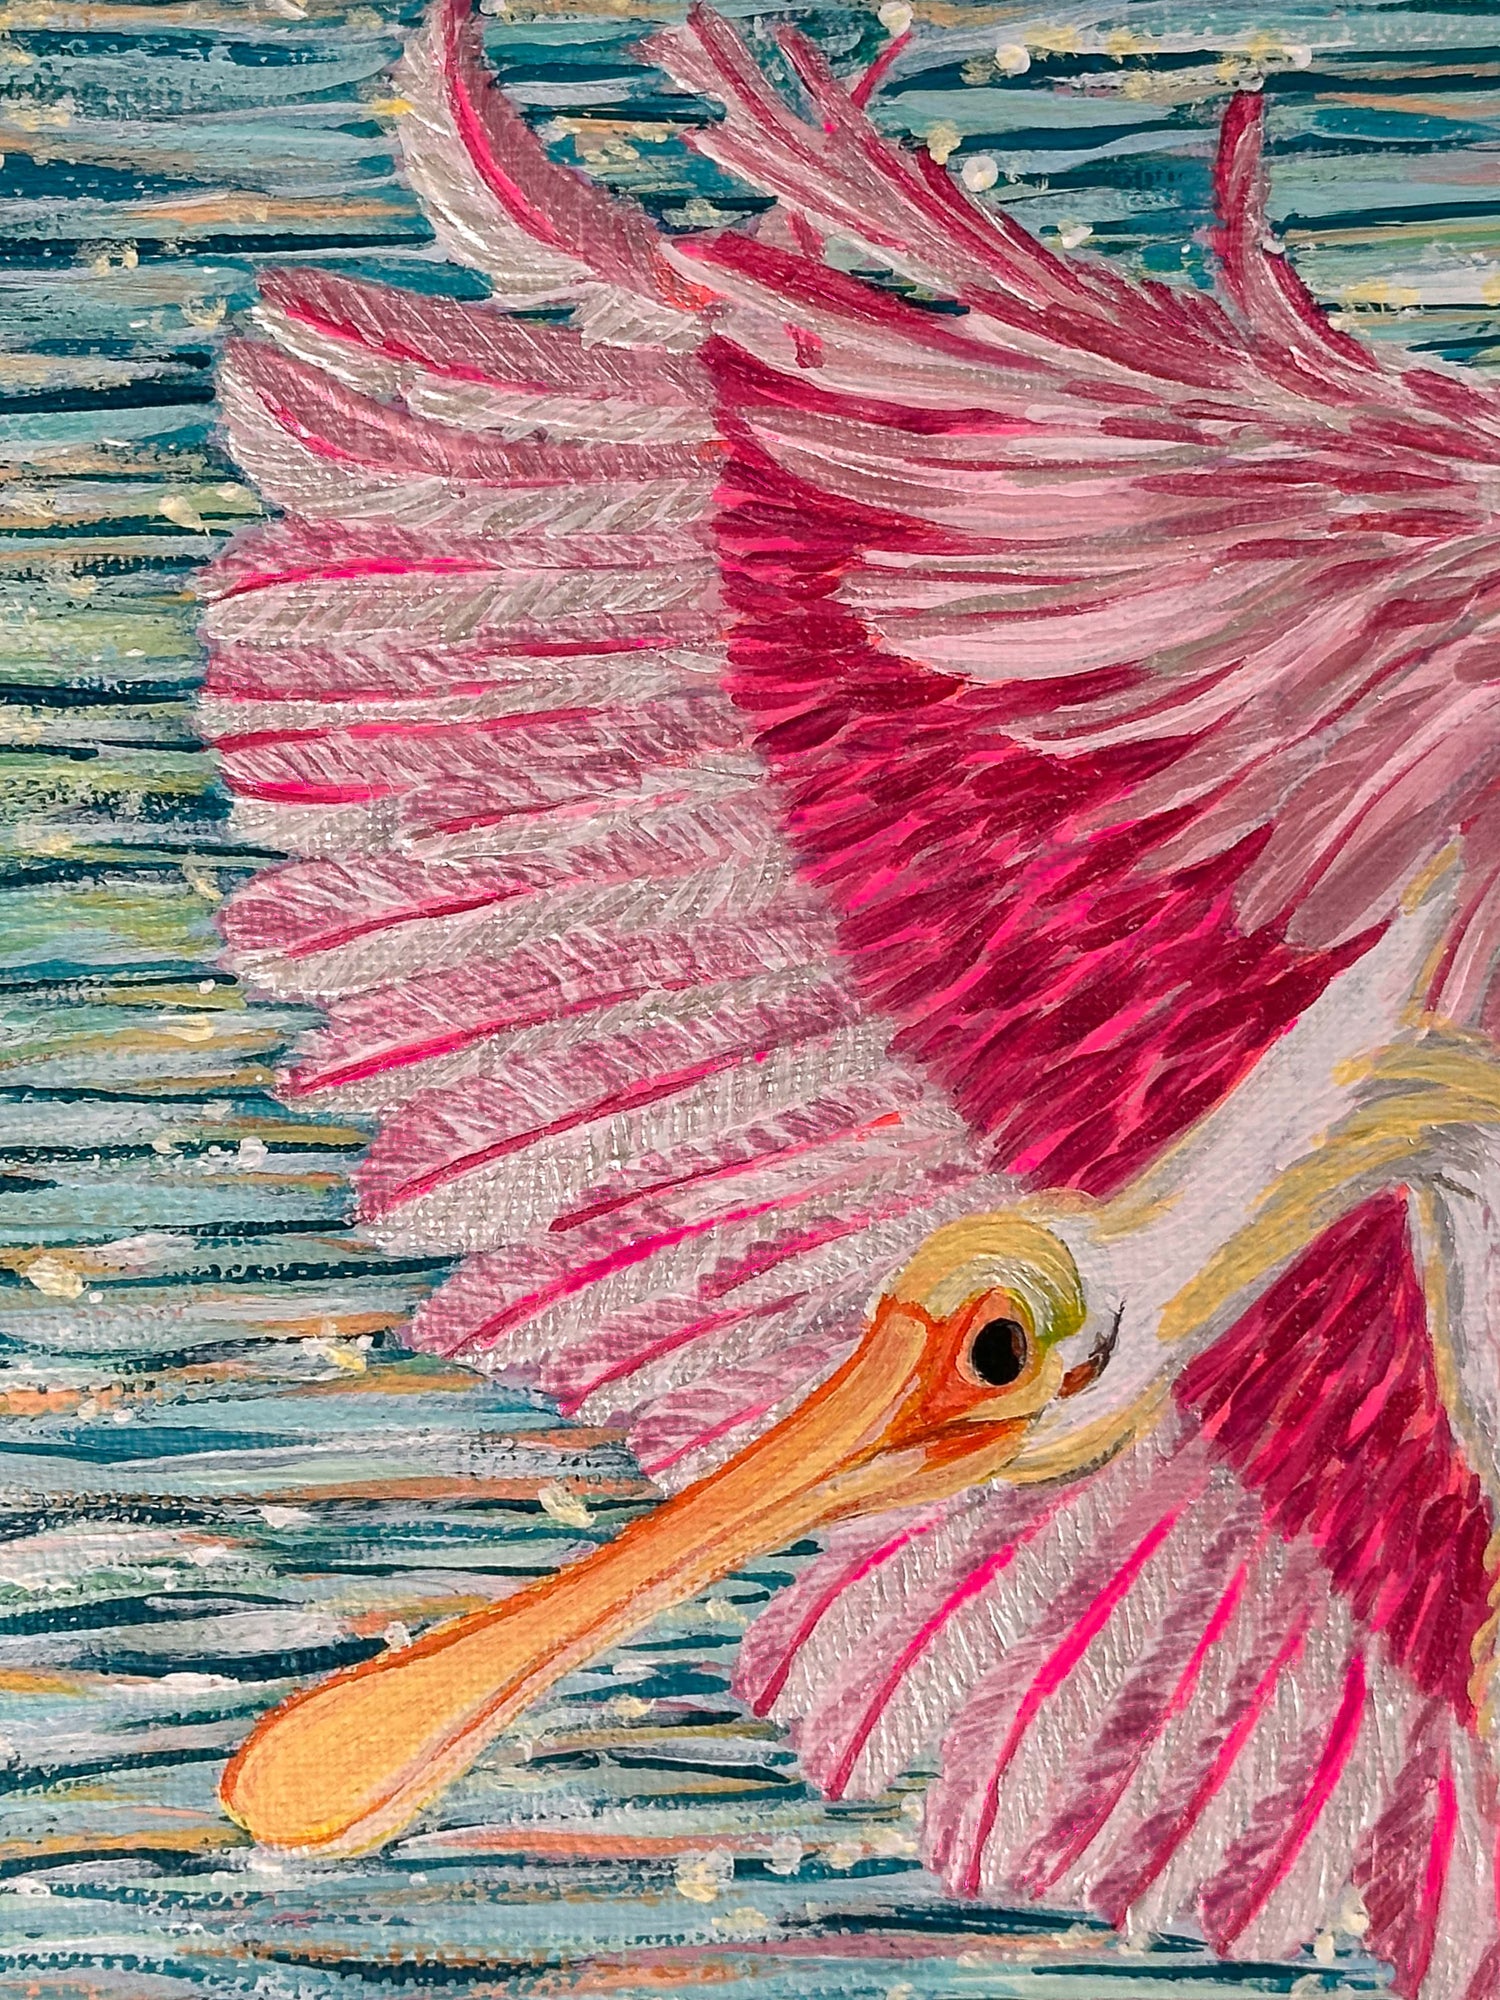 Roseate Spoonbill Contemporary Acrylic on Canvas Painting Acrylic on Canvas, 8” x 8” HELLO MISS E. 